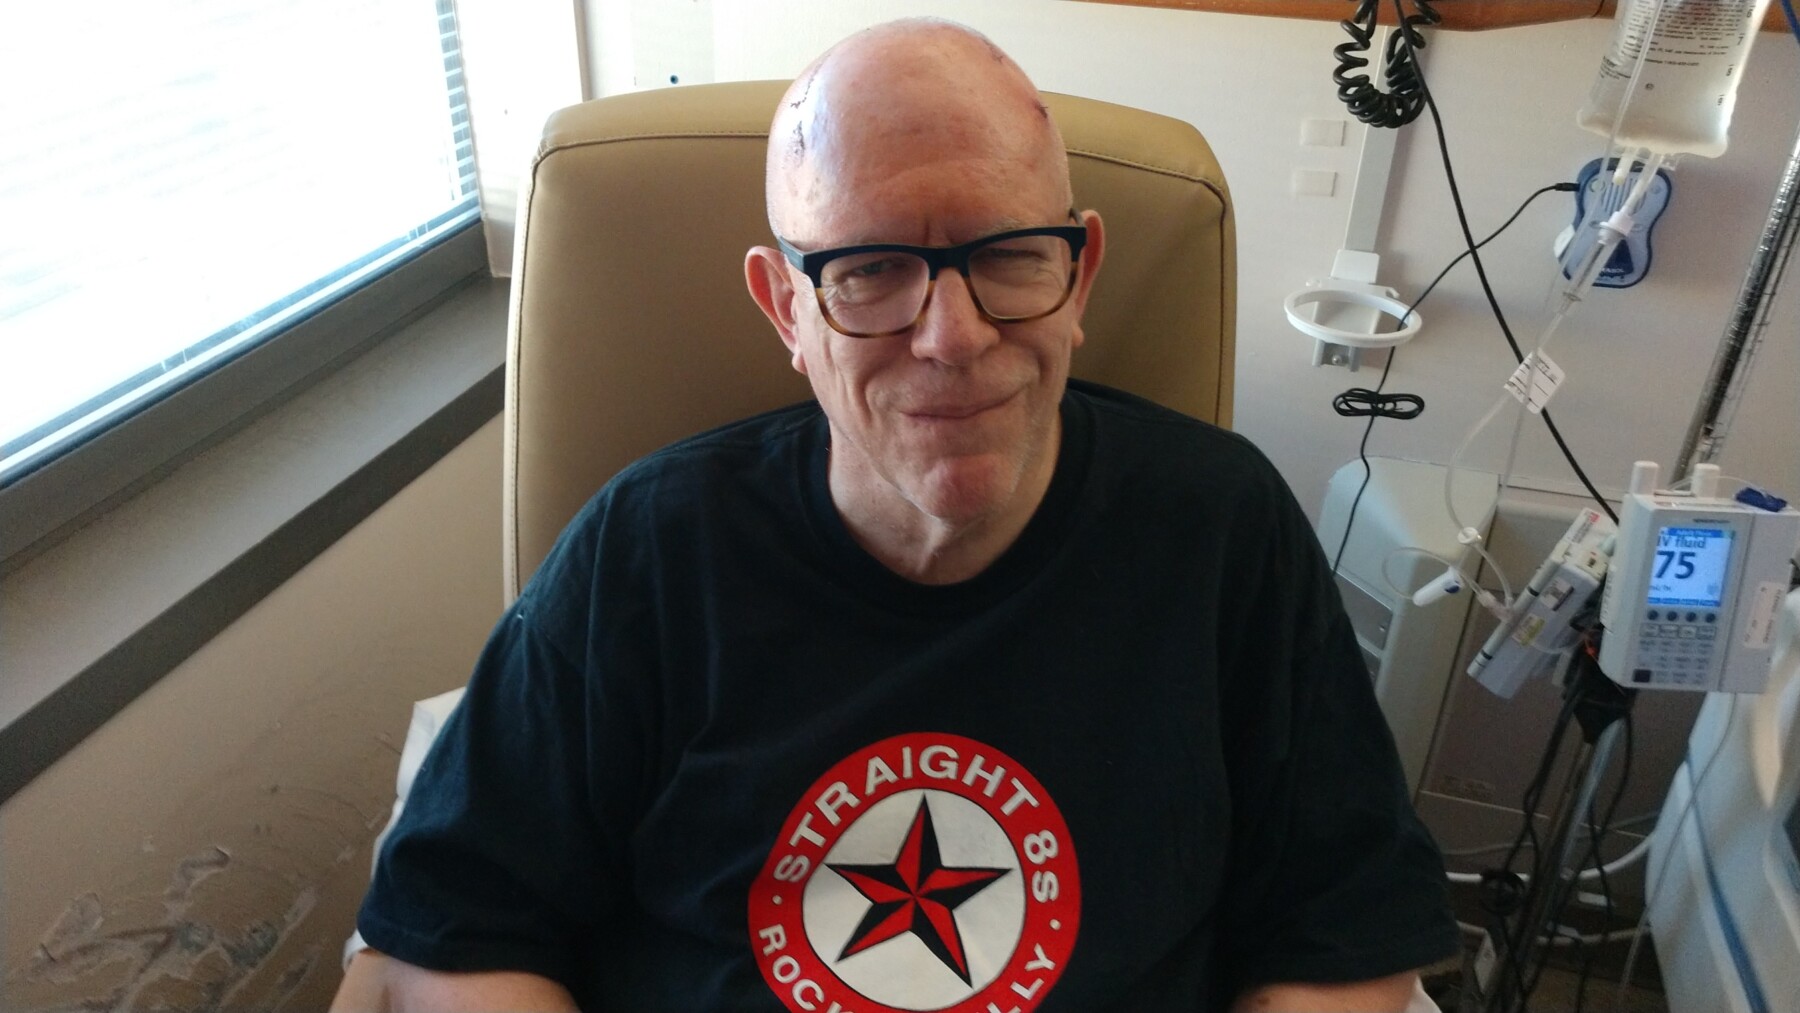 A man grins at the camera while seated in a chair in his hospital room. He's wearing glasses and a dark T-shirt, and we can see the ends of the incision on his head. There's a window to his right, and various pieces of medical equipment in the background.